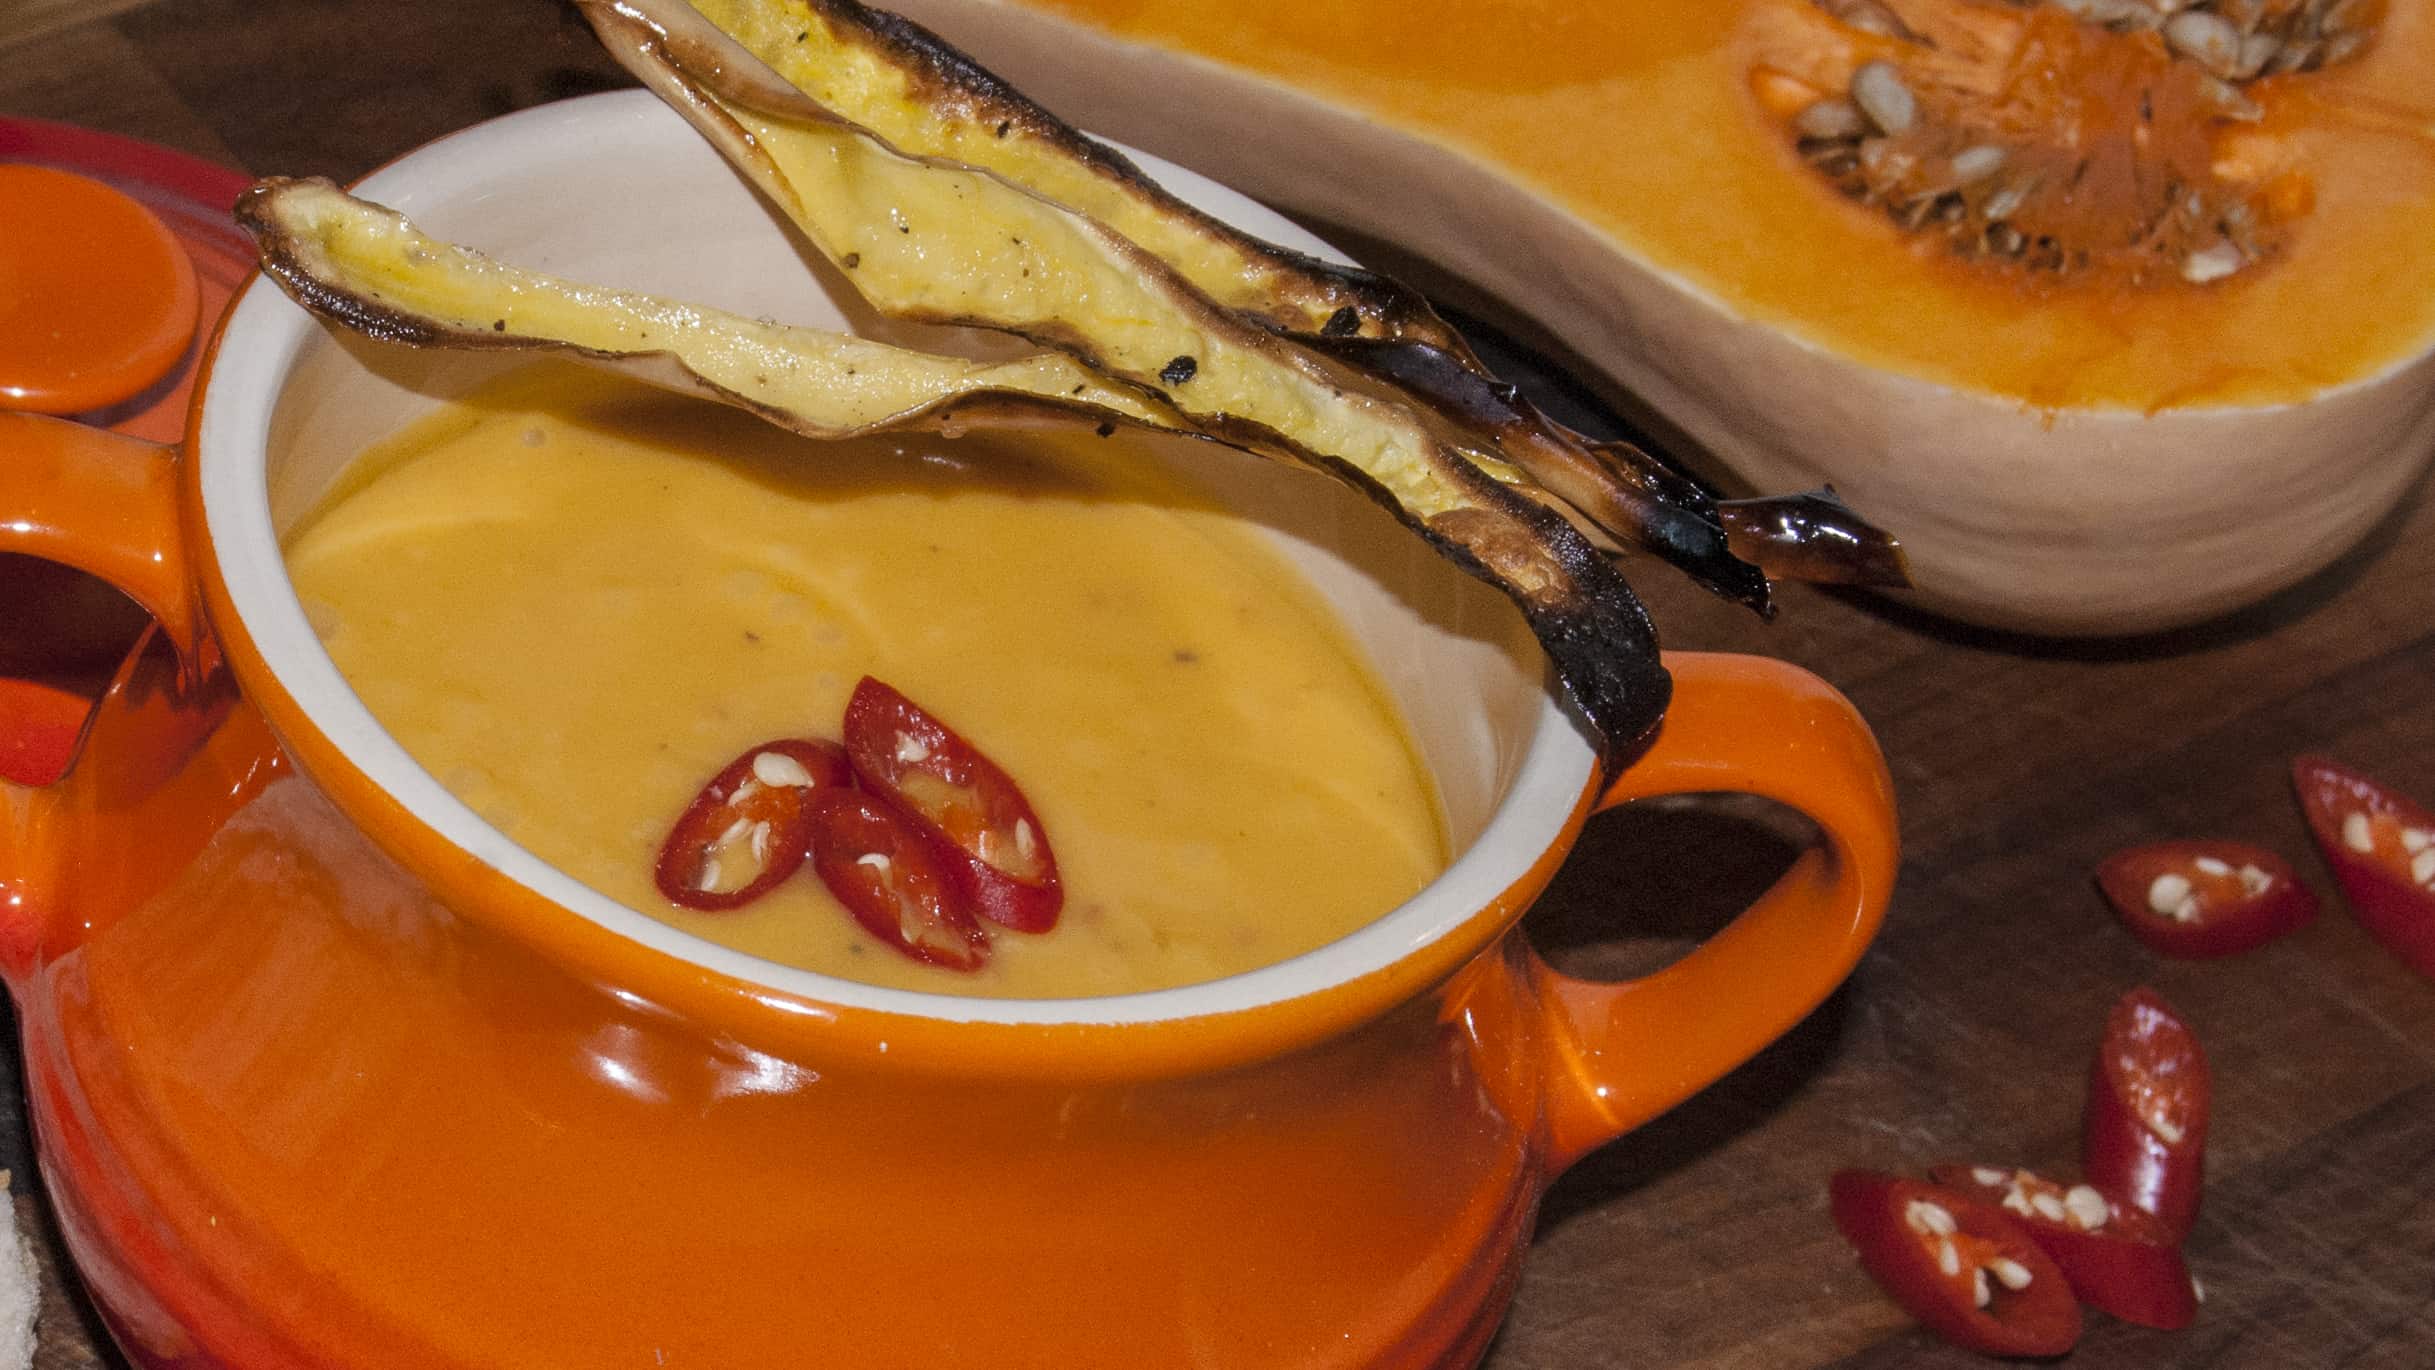 pumpkin spiced soup topped with chillies in an orange le crueset soup terrine